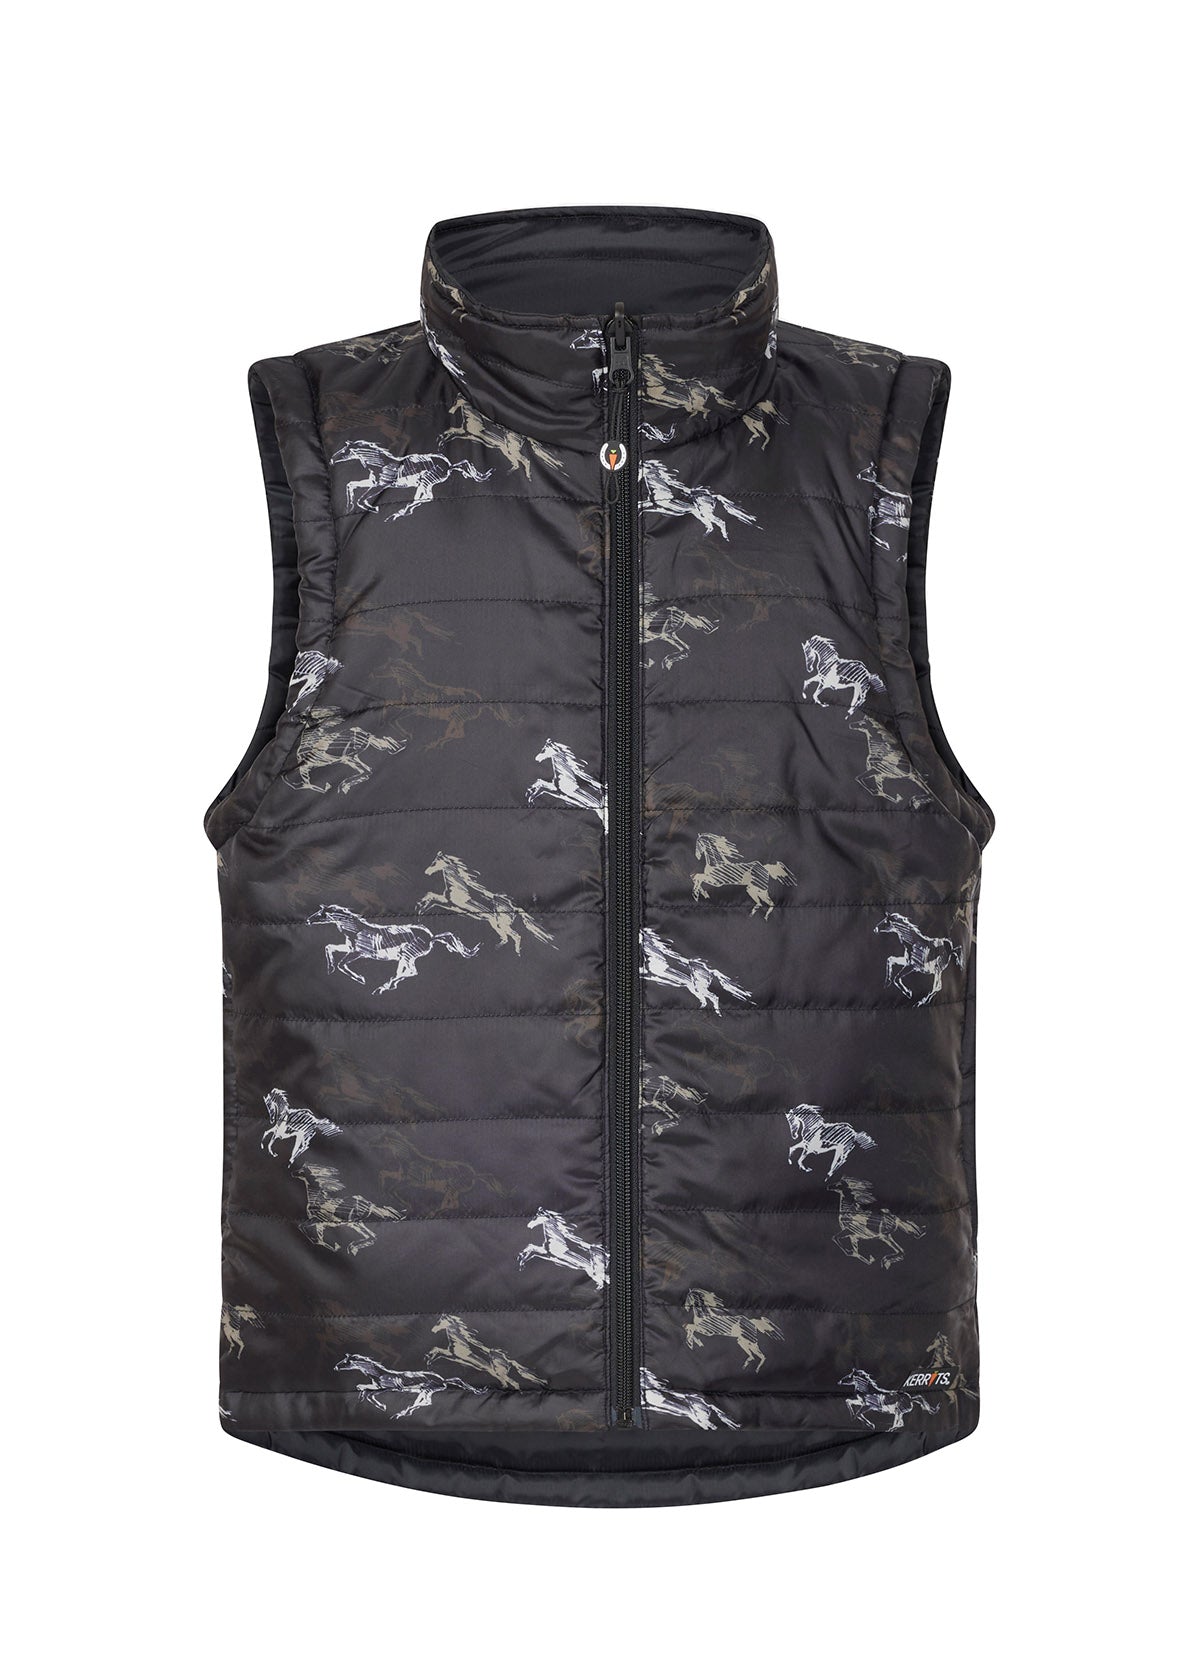 Front view of kids, black and brown riding vest